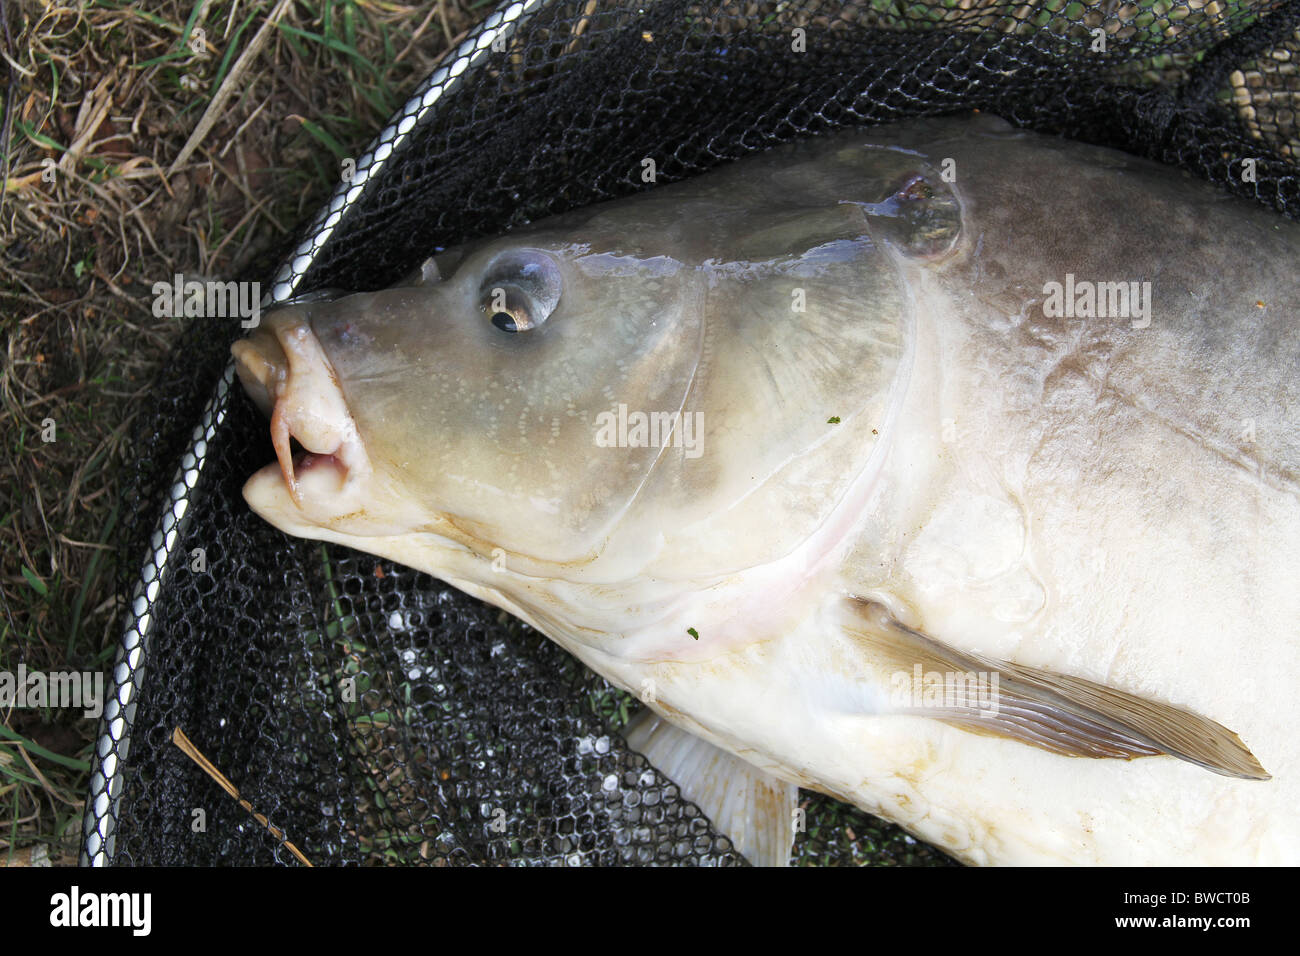 Big Fish in the Fishing Net Stock Image - Image of mouth, lake: 159752457